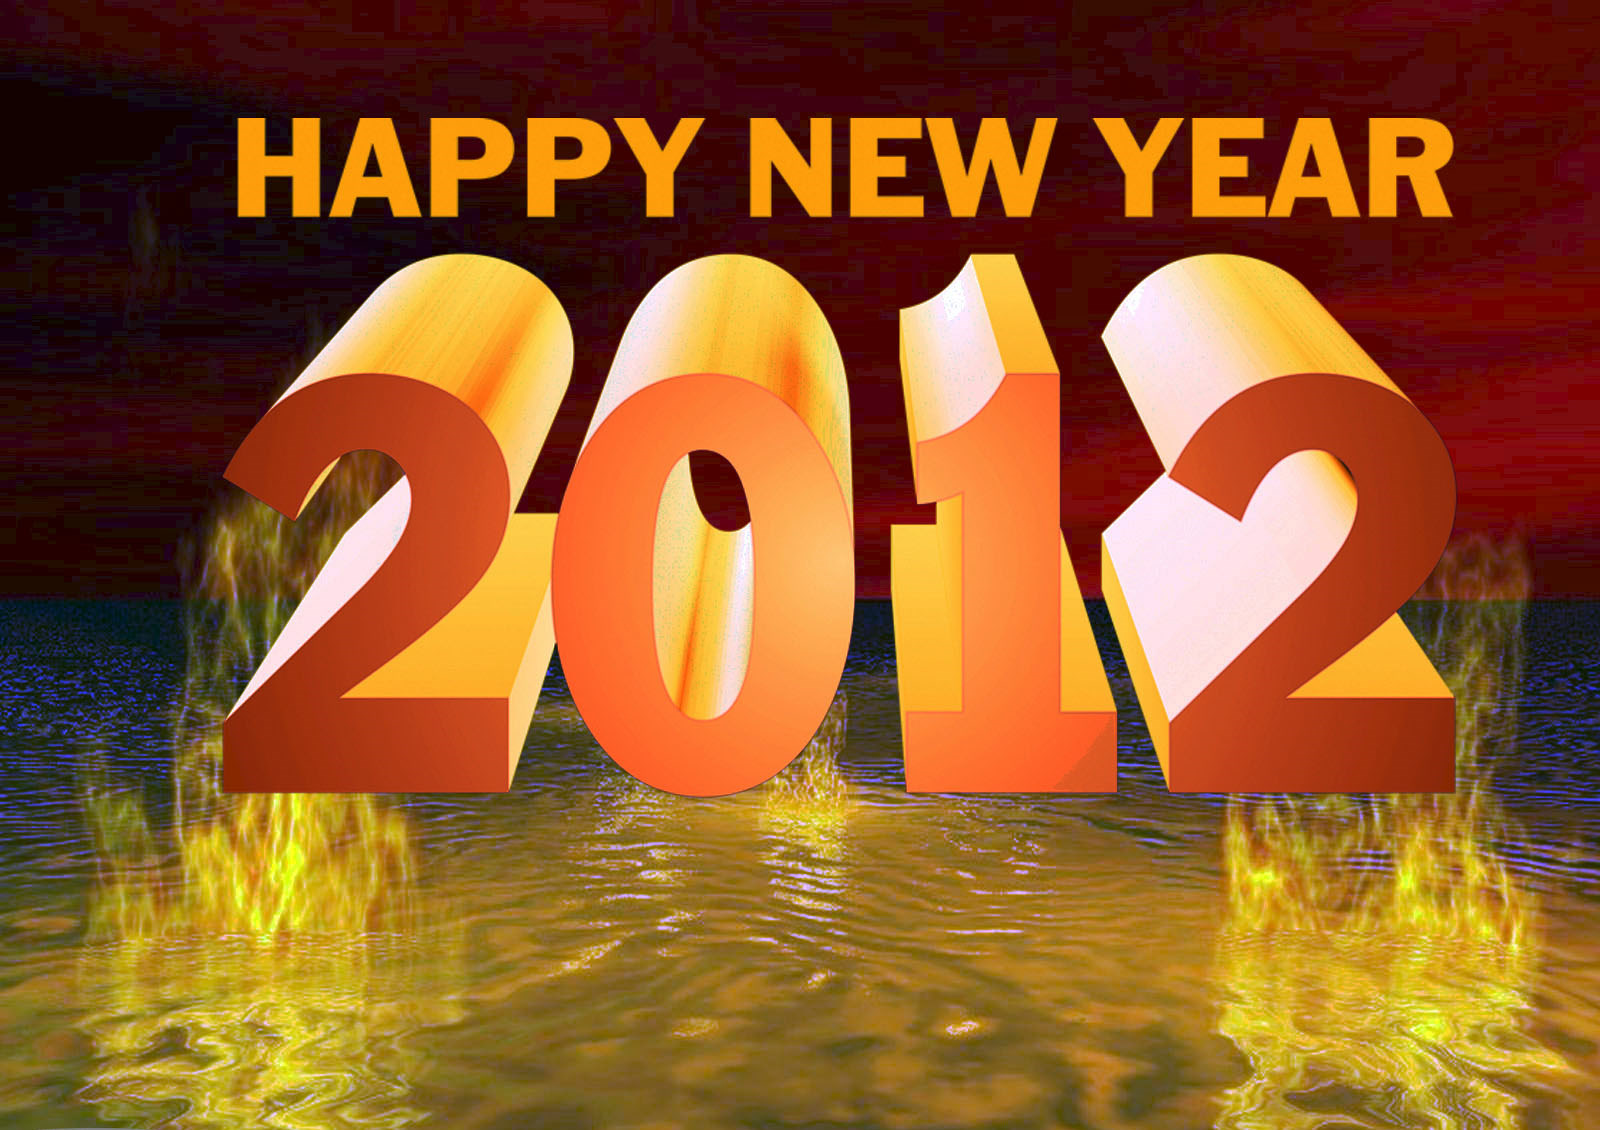 Happy New Year 2012: Greetings and wallpapers | Greetings